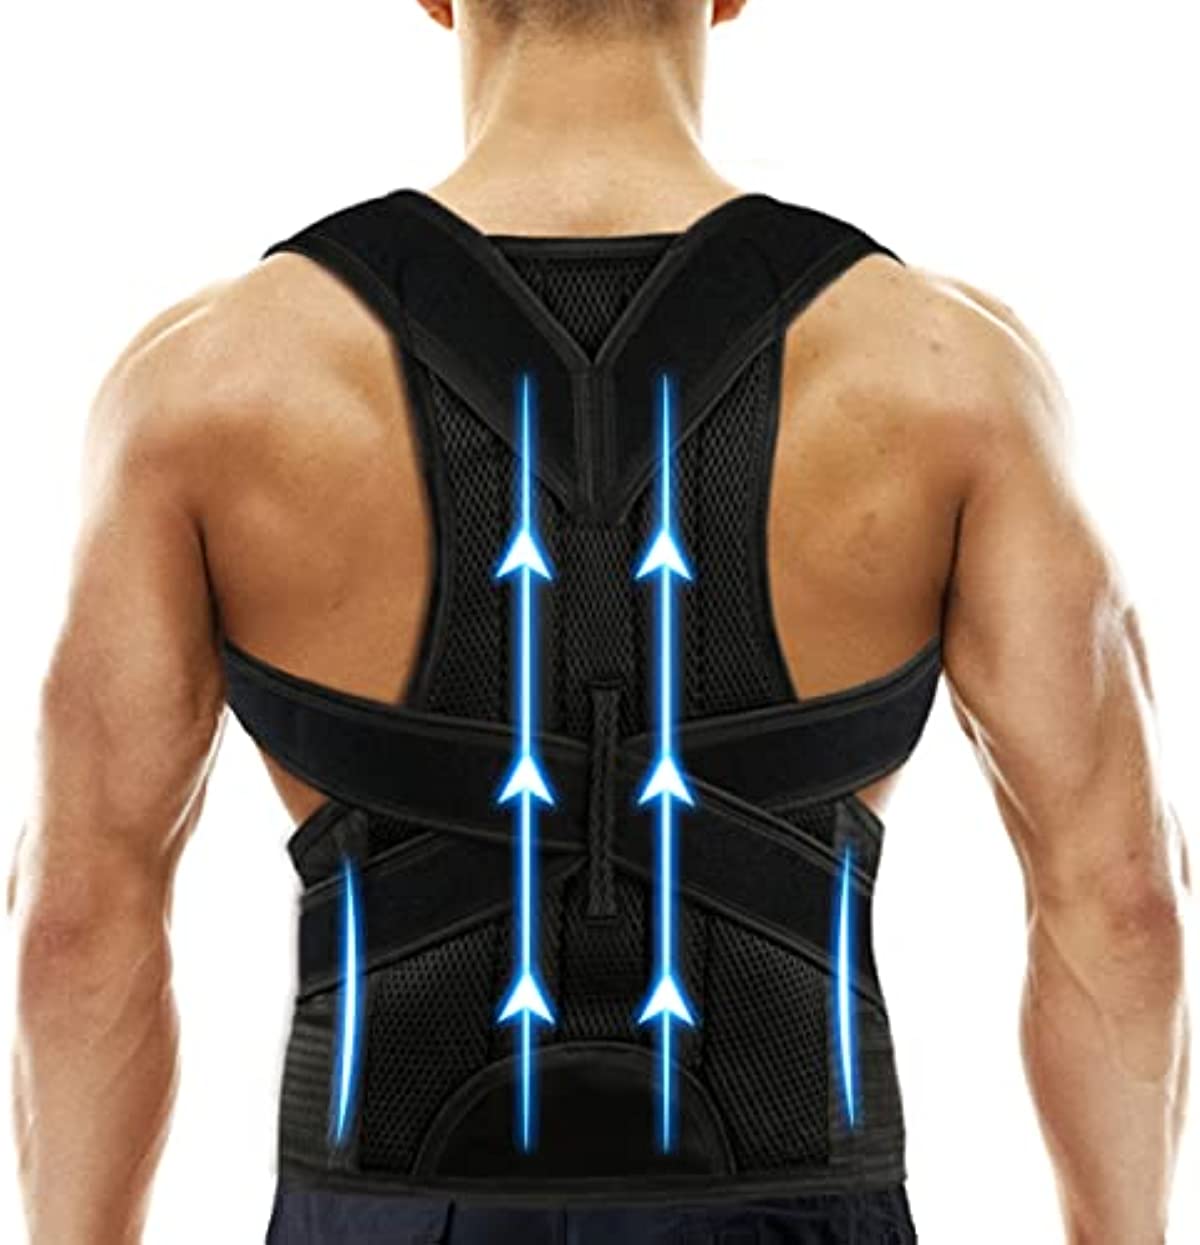 Back Brace Posture Corrector for Women and Men - Relief for Waist, Back and Shoulder Pain - Adjustable and Breathable Posture Back Brace - Improve Back Posture and Provide Lumbar Support M(29\"-33\")